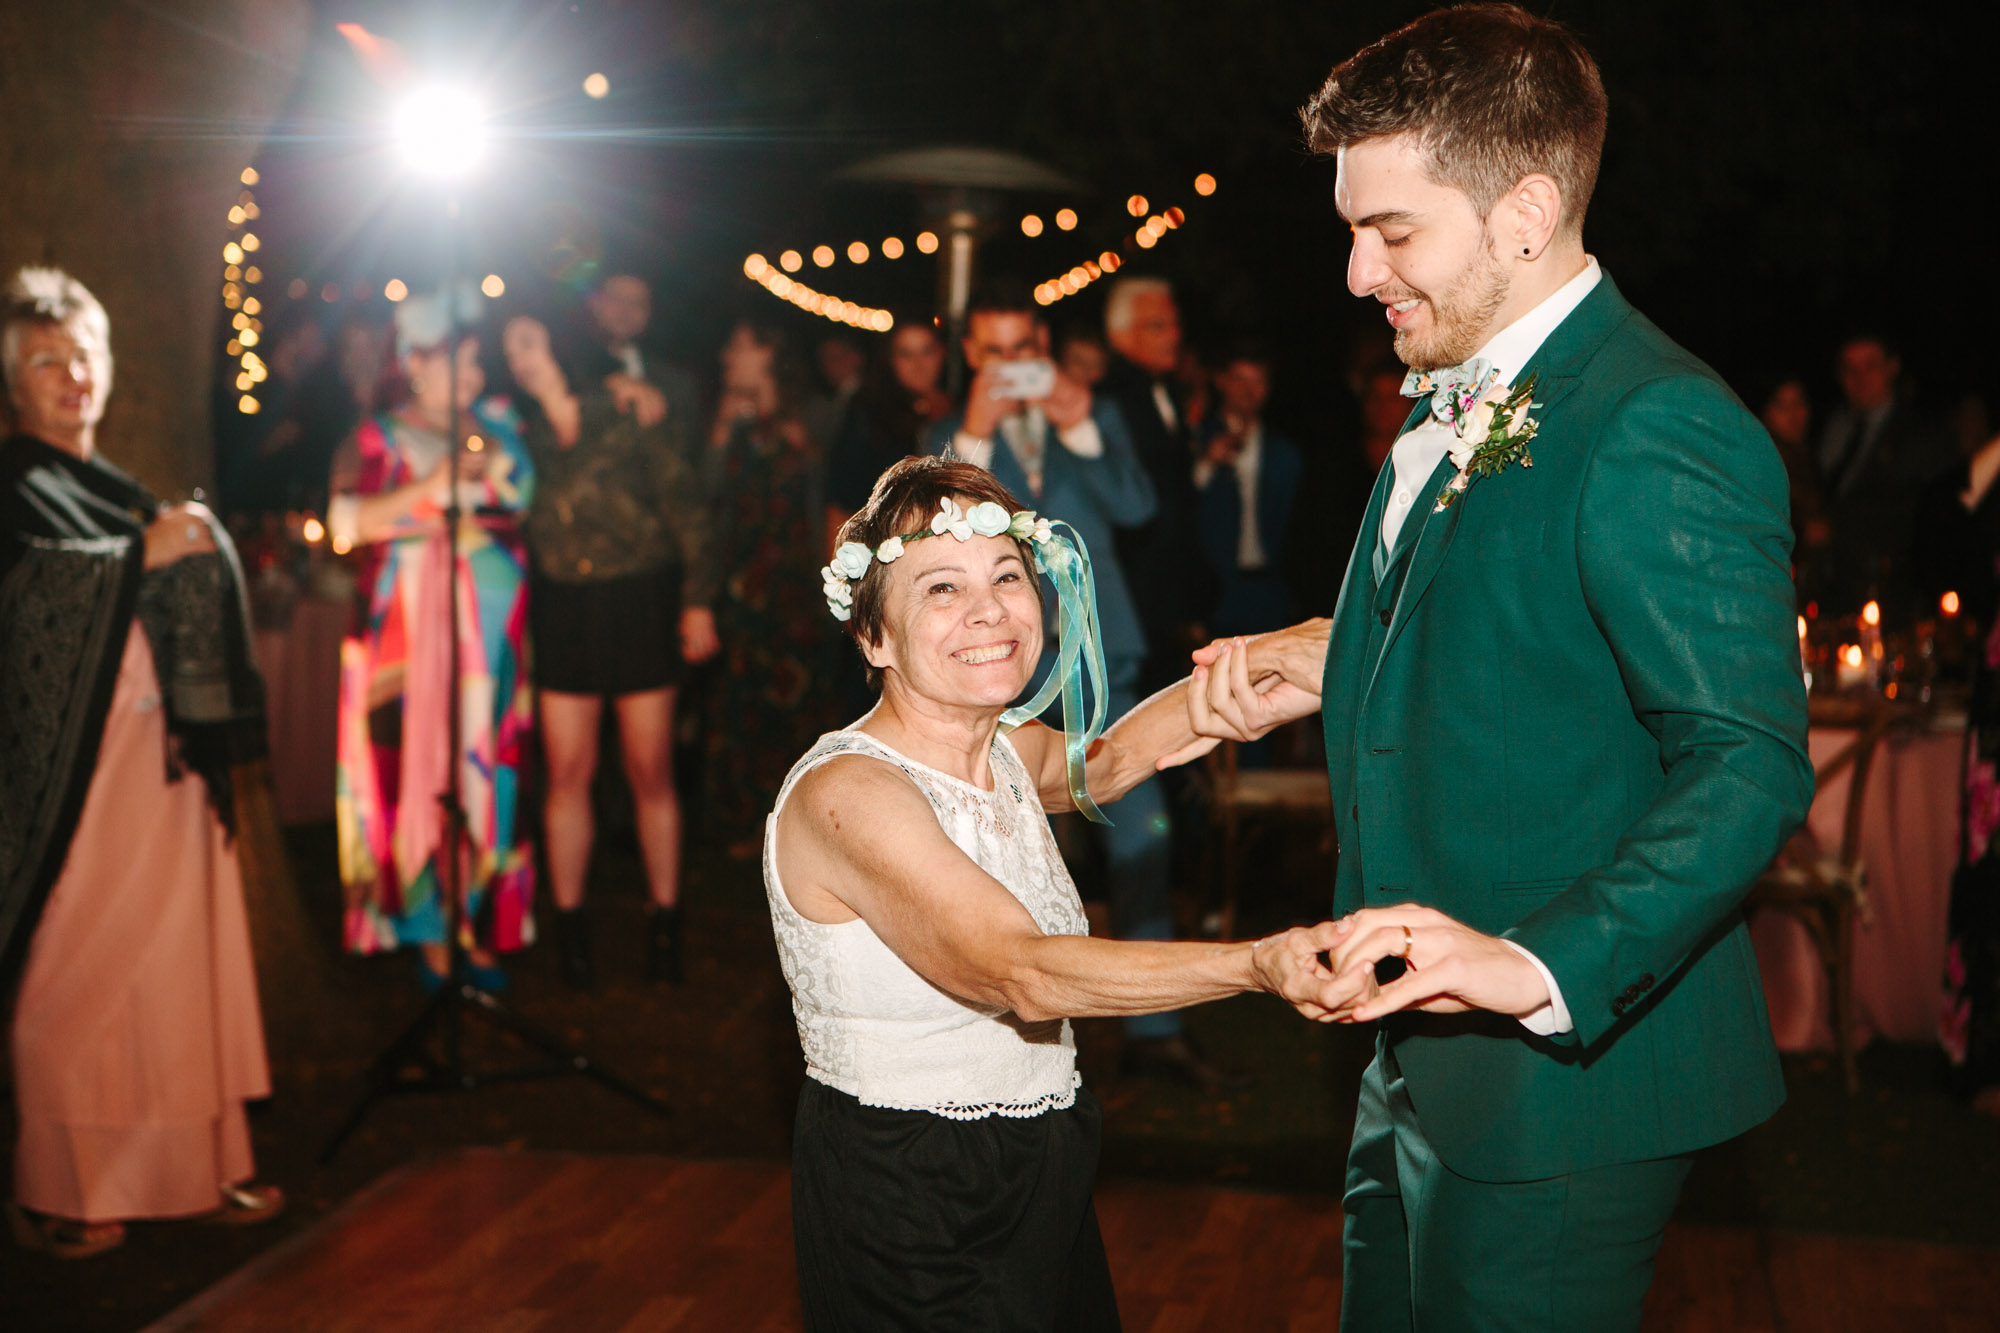 Mother-son dance at wedding by Mary Costa Photography